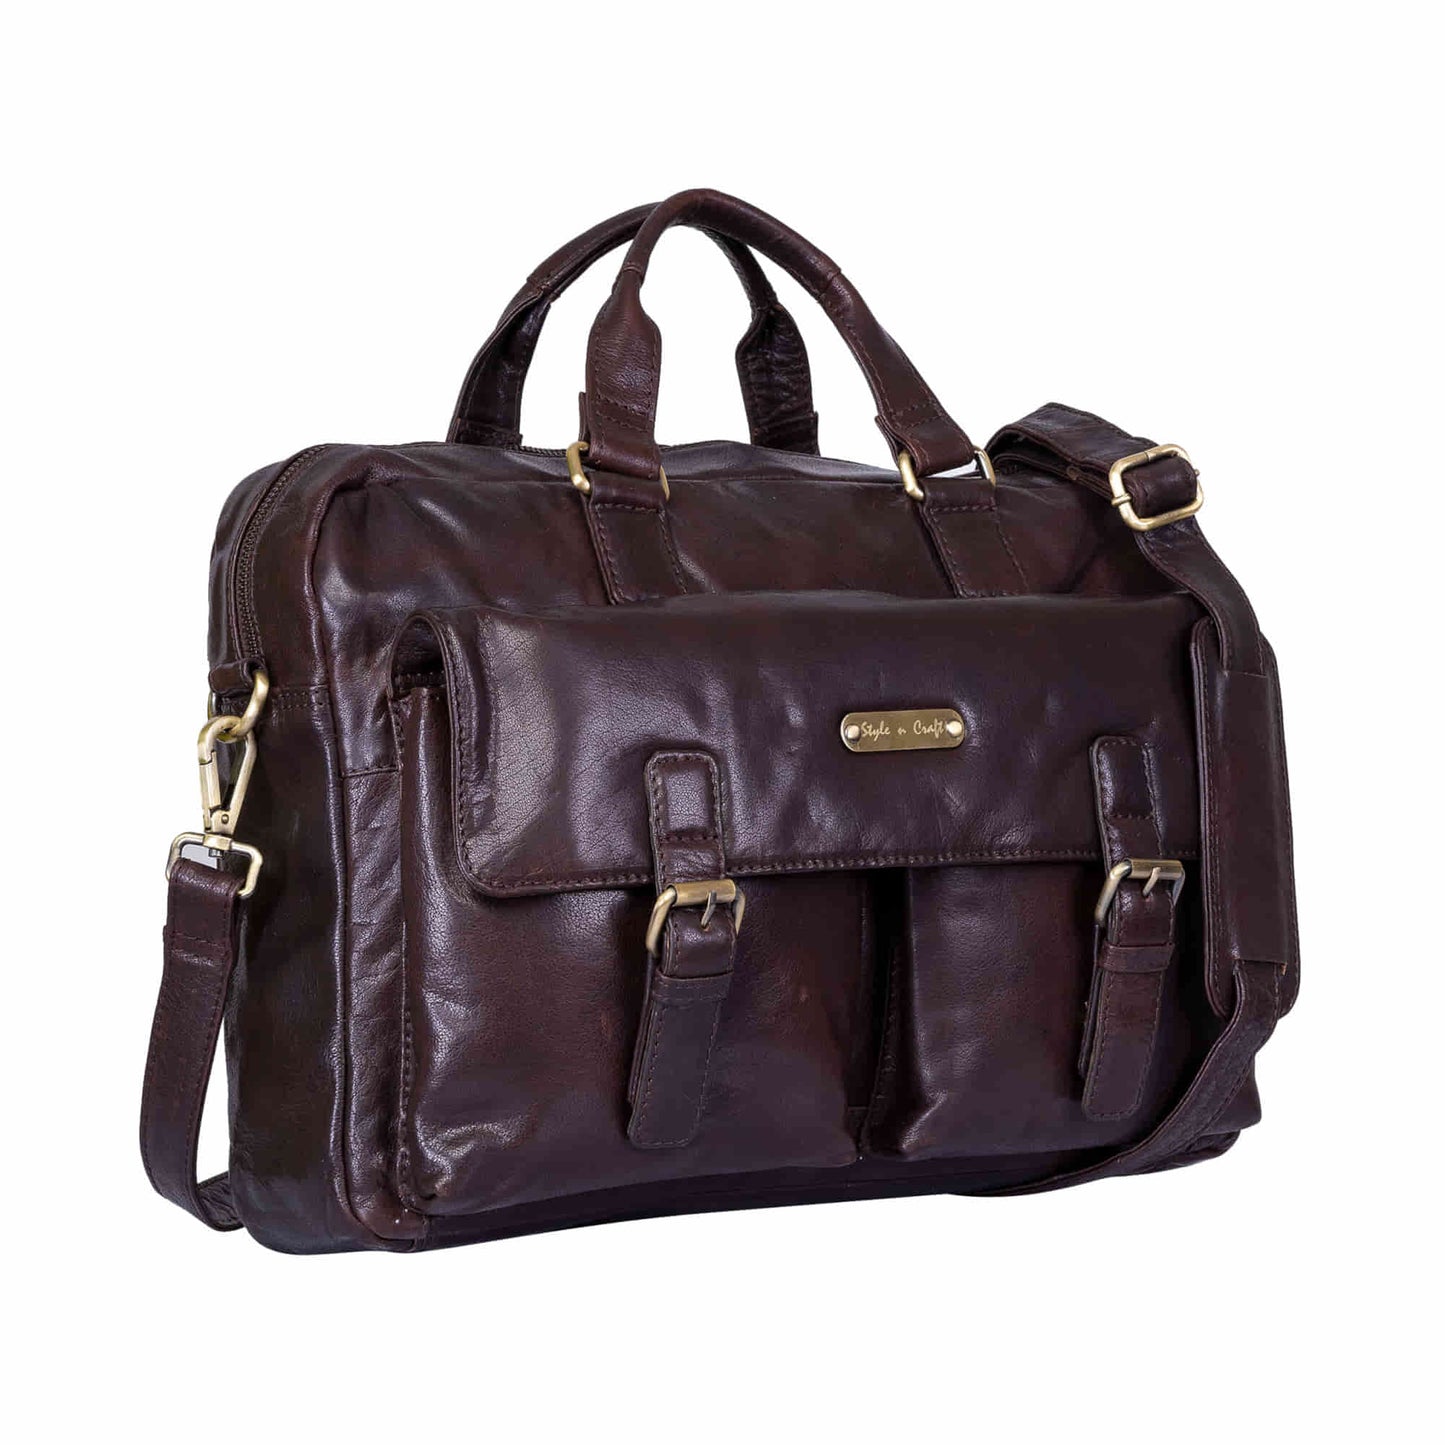 Style n Craft 392500 Cross Body Messenger Bag in Full Grain Dark Brown Vintage Leather - Front left side angled view showing the top leather strap handles, the 2 front pockets with the flap and the detachable & adjustable leather shoulder strap